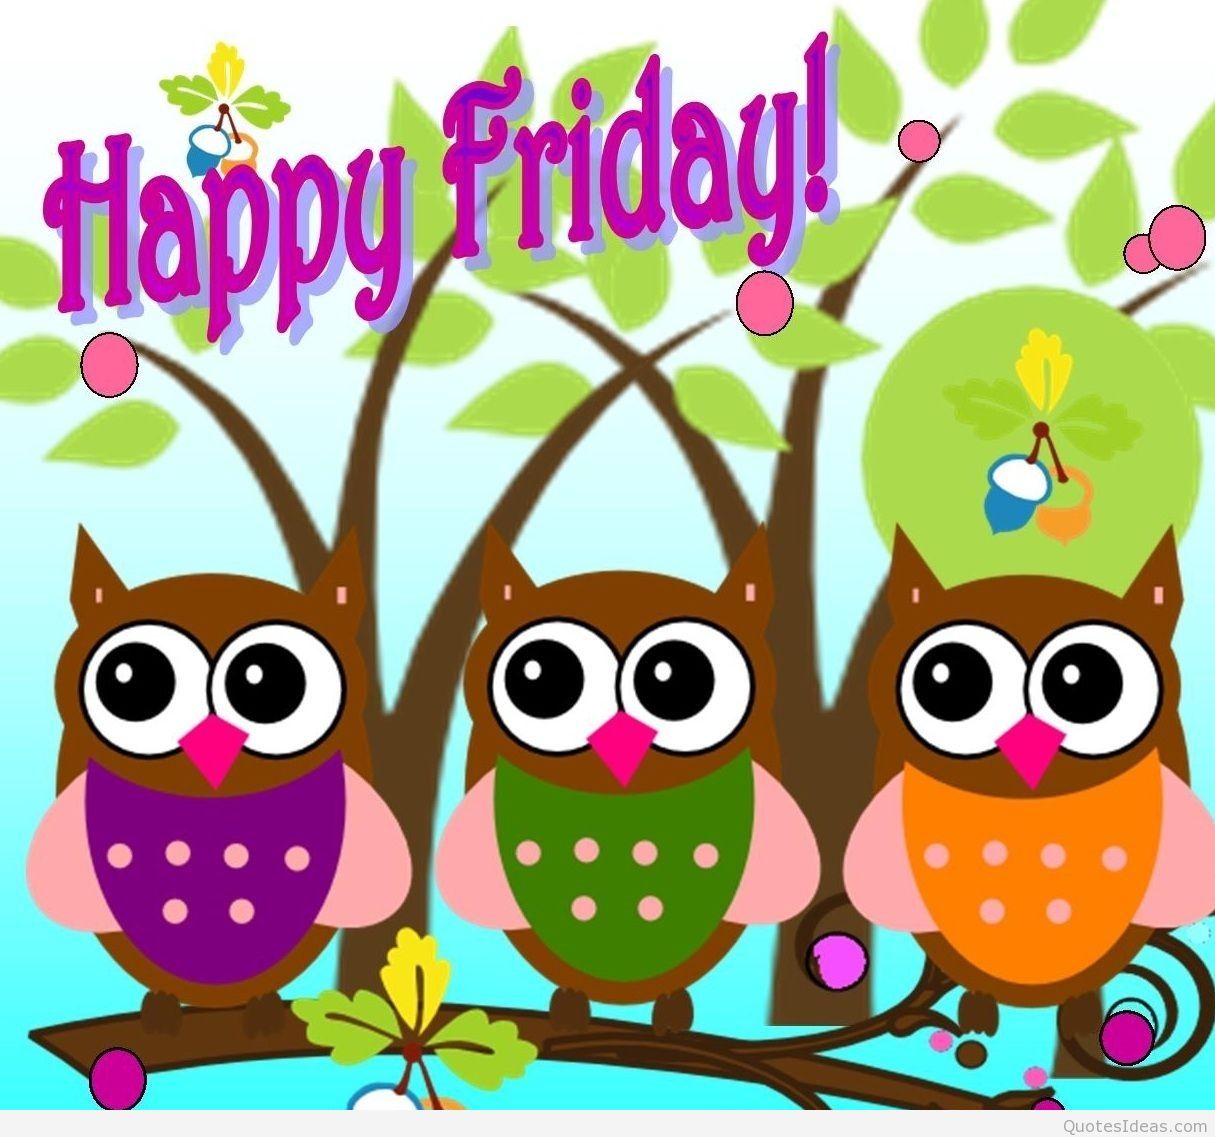 Happy Weekend Happy Friday Quote Message Wallpaper - Happy Friday Clipart - HD Wallpaper 